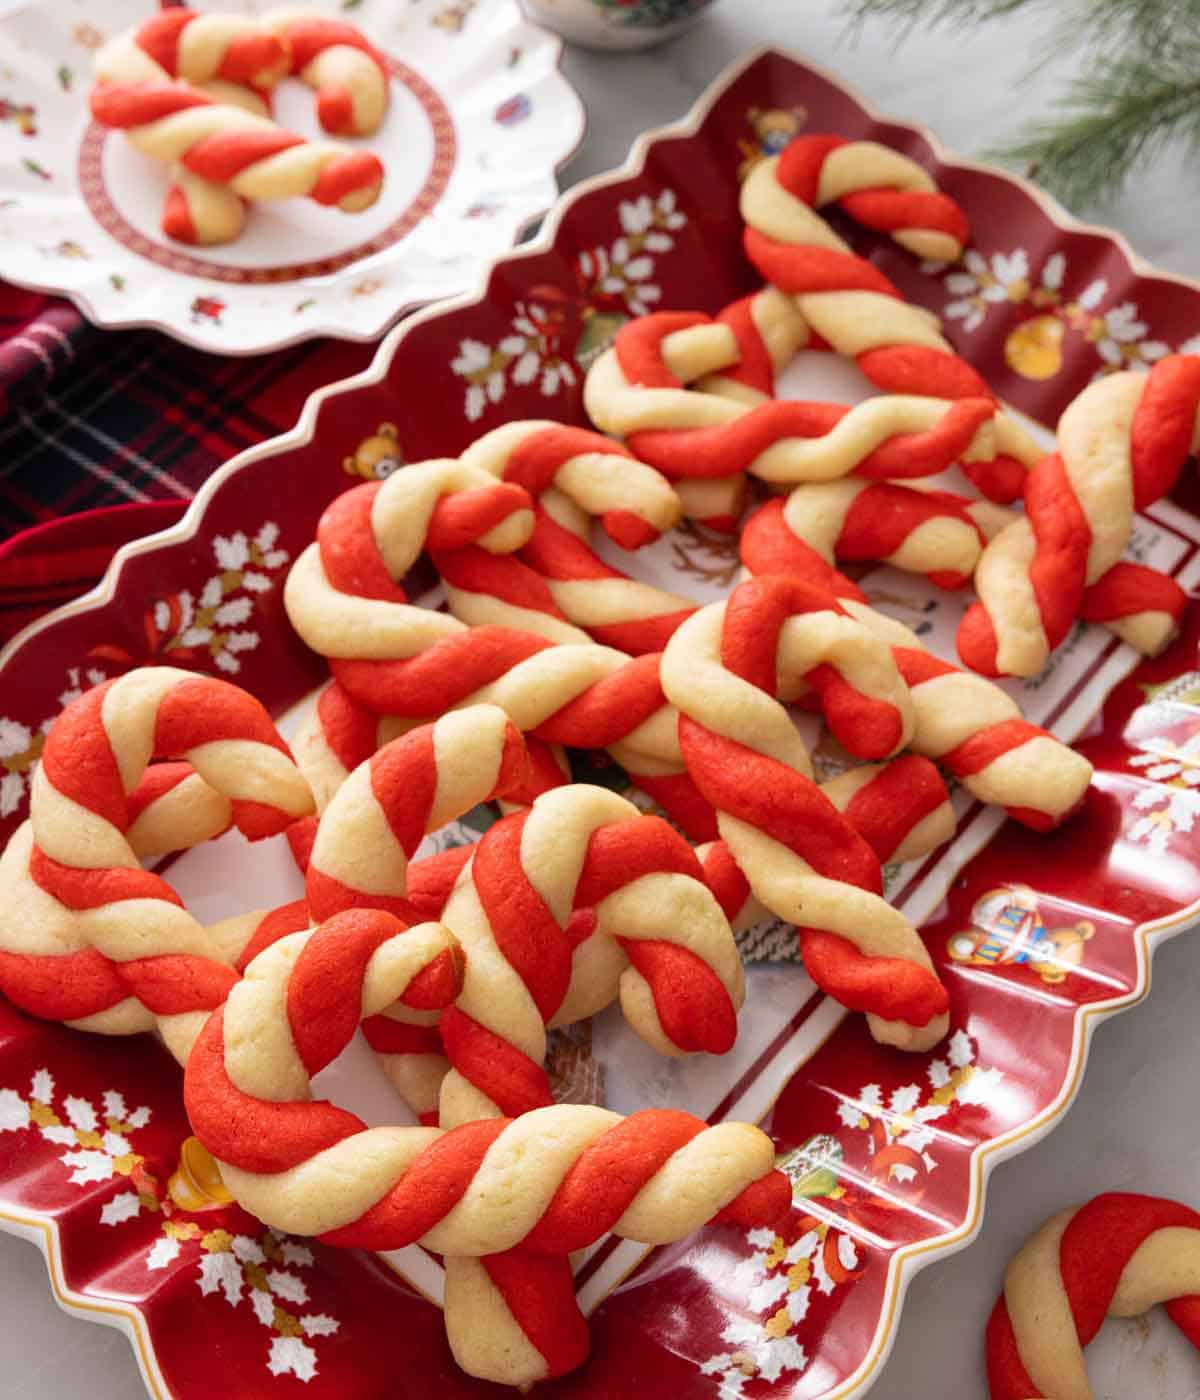 A platter of multiple candy cane cookies.